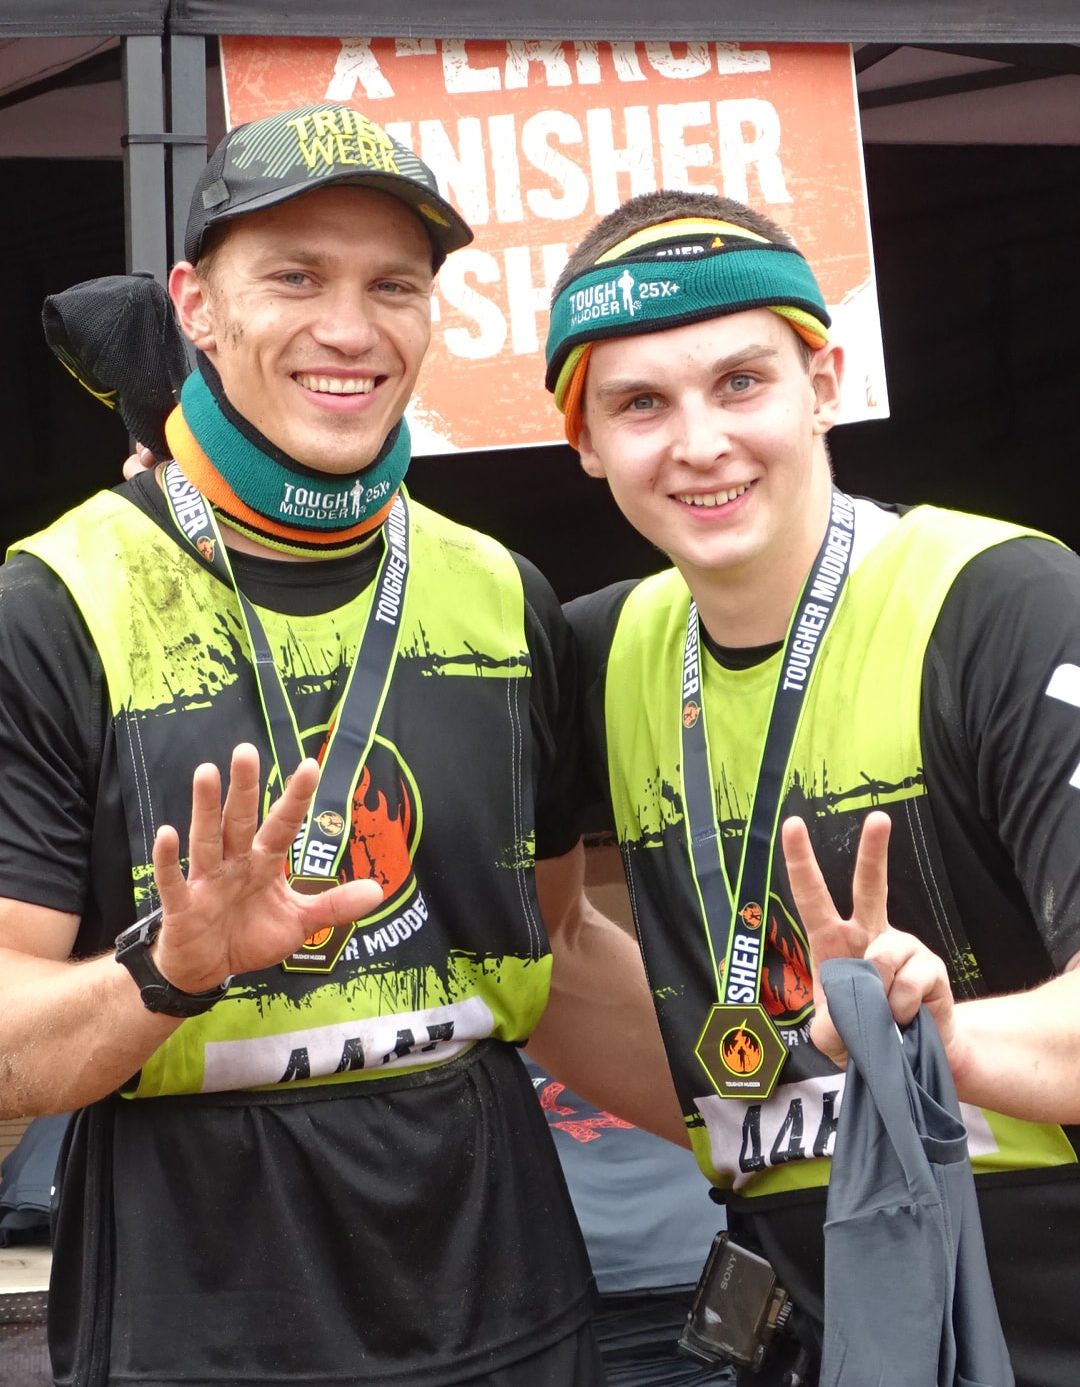 You are currently viewing Tough Mudder Nord 2019: Unser 25. Jubiläum!